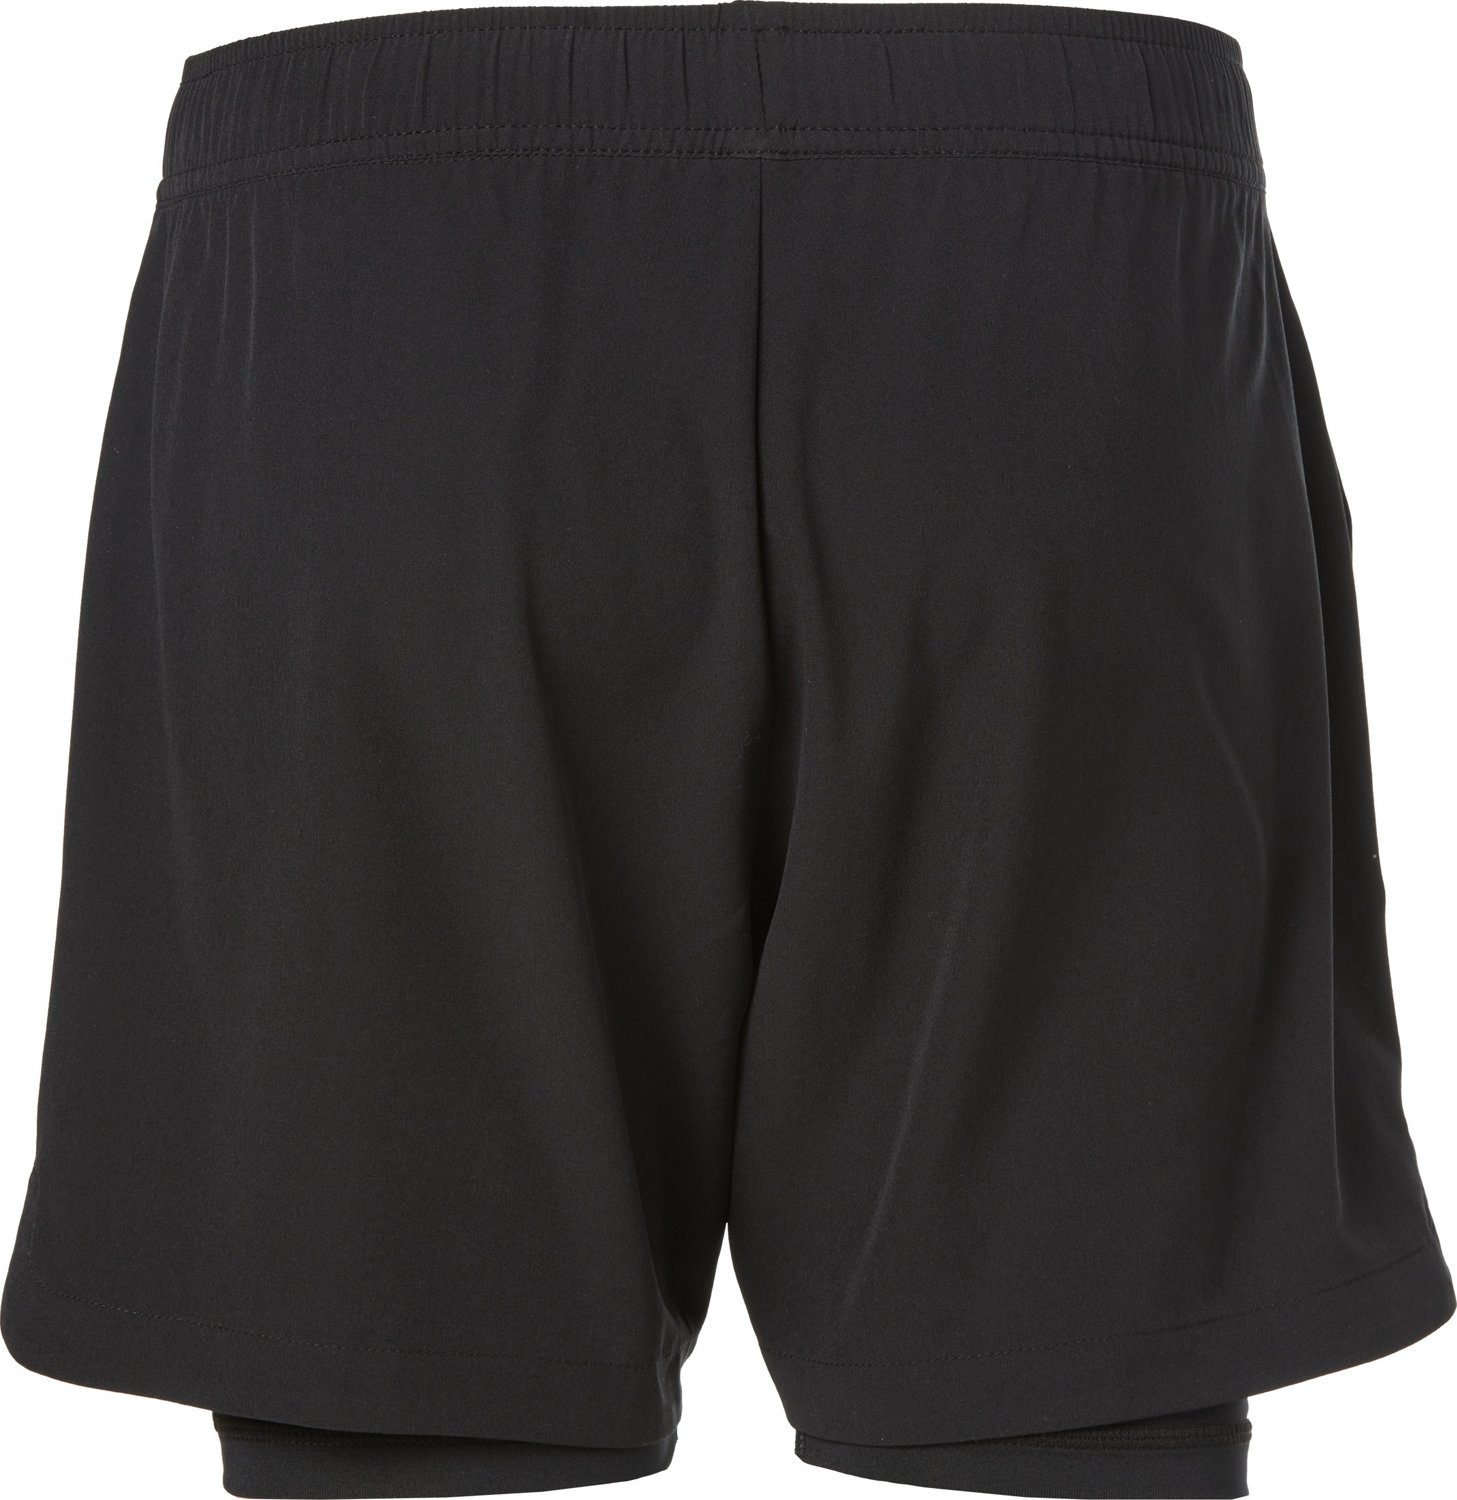 BCG Boys' 2 in 1 Shorts | Free Shipping at Academy